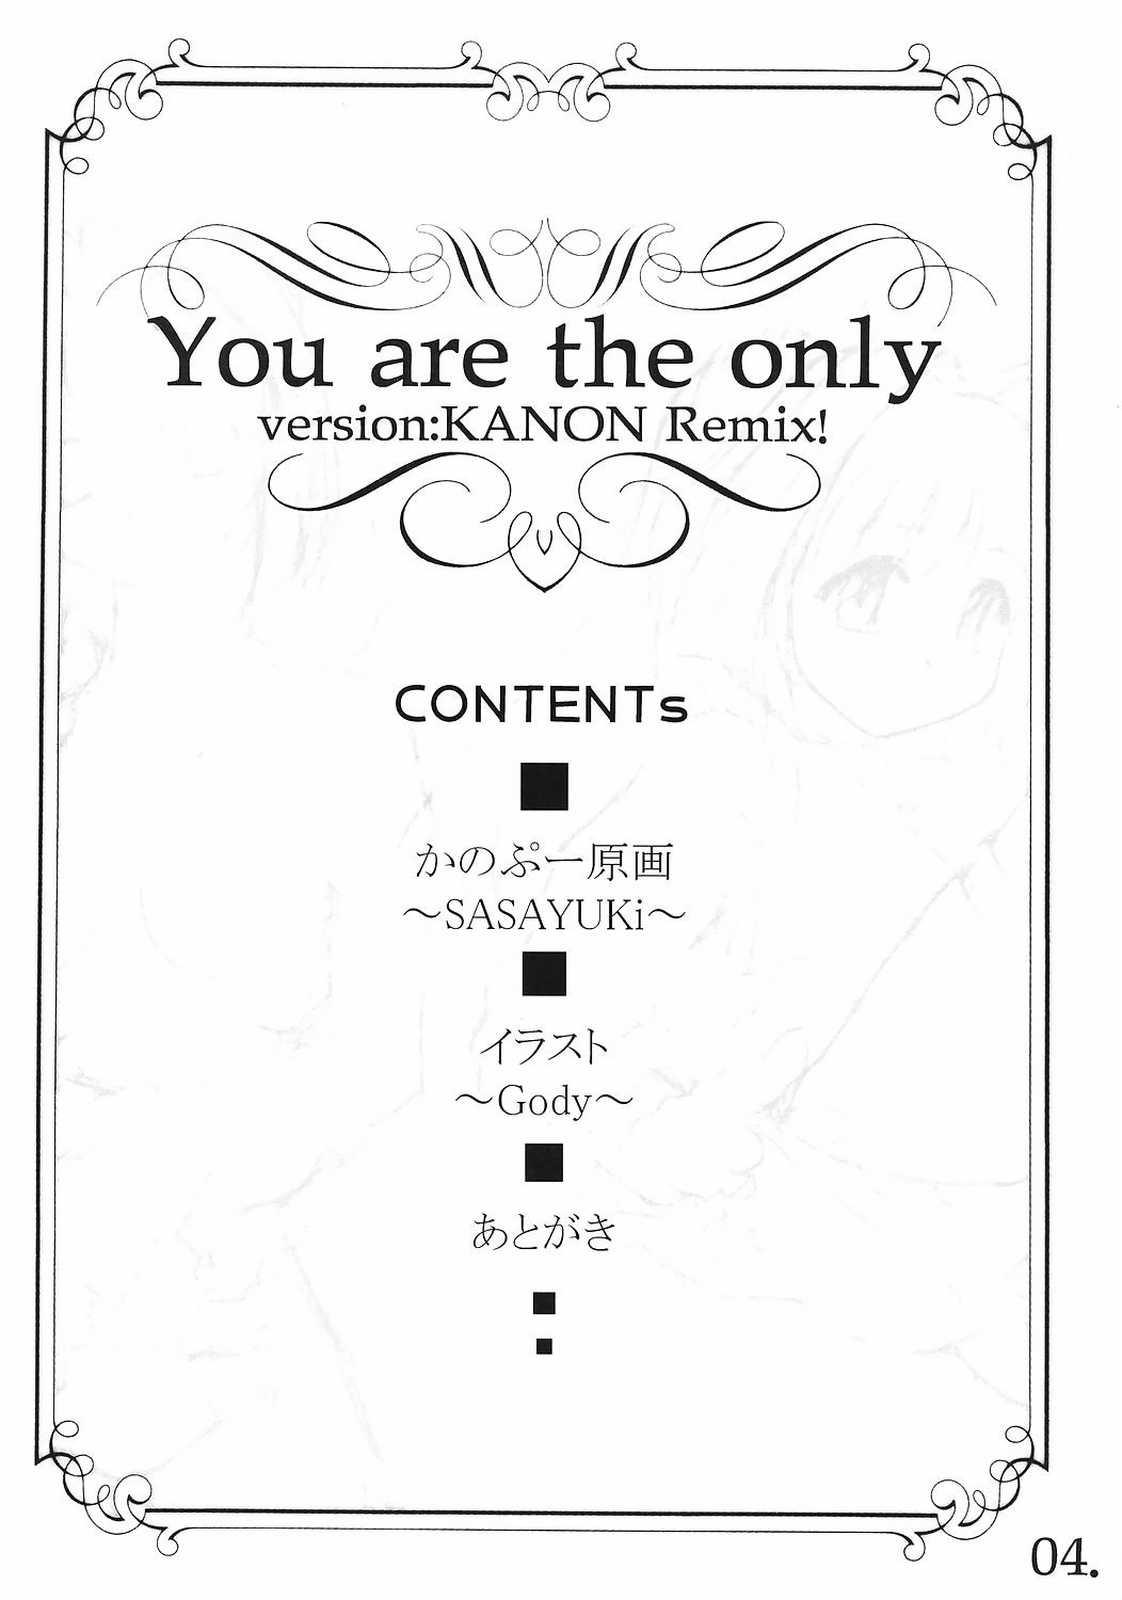 You are the only version: KANON remix 2